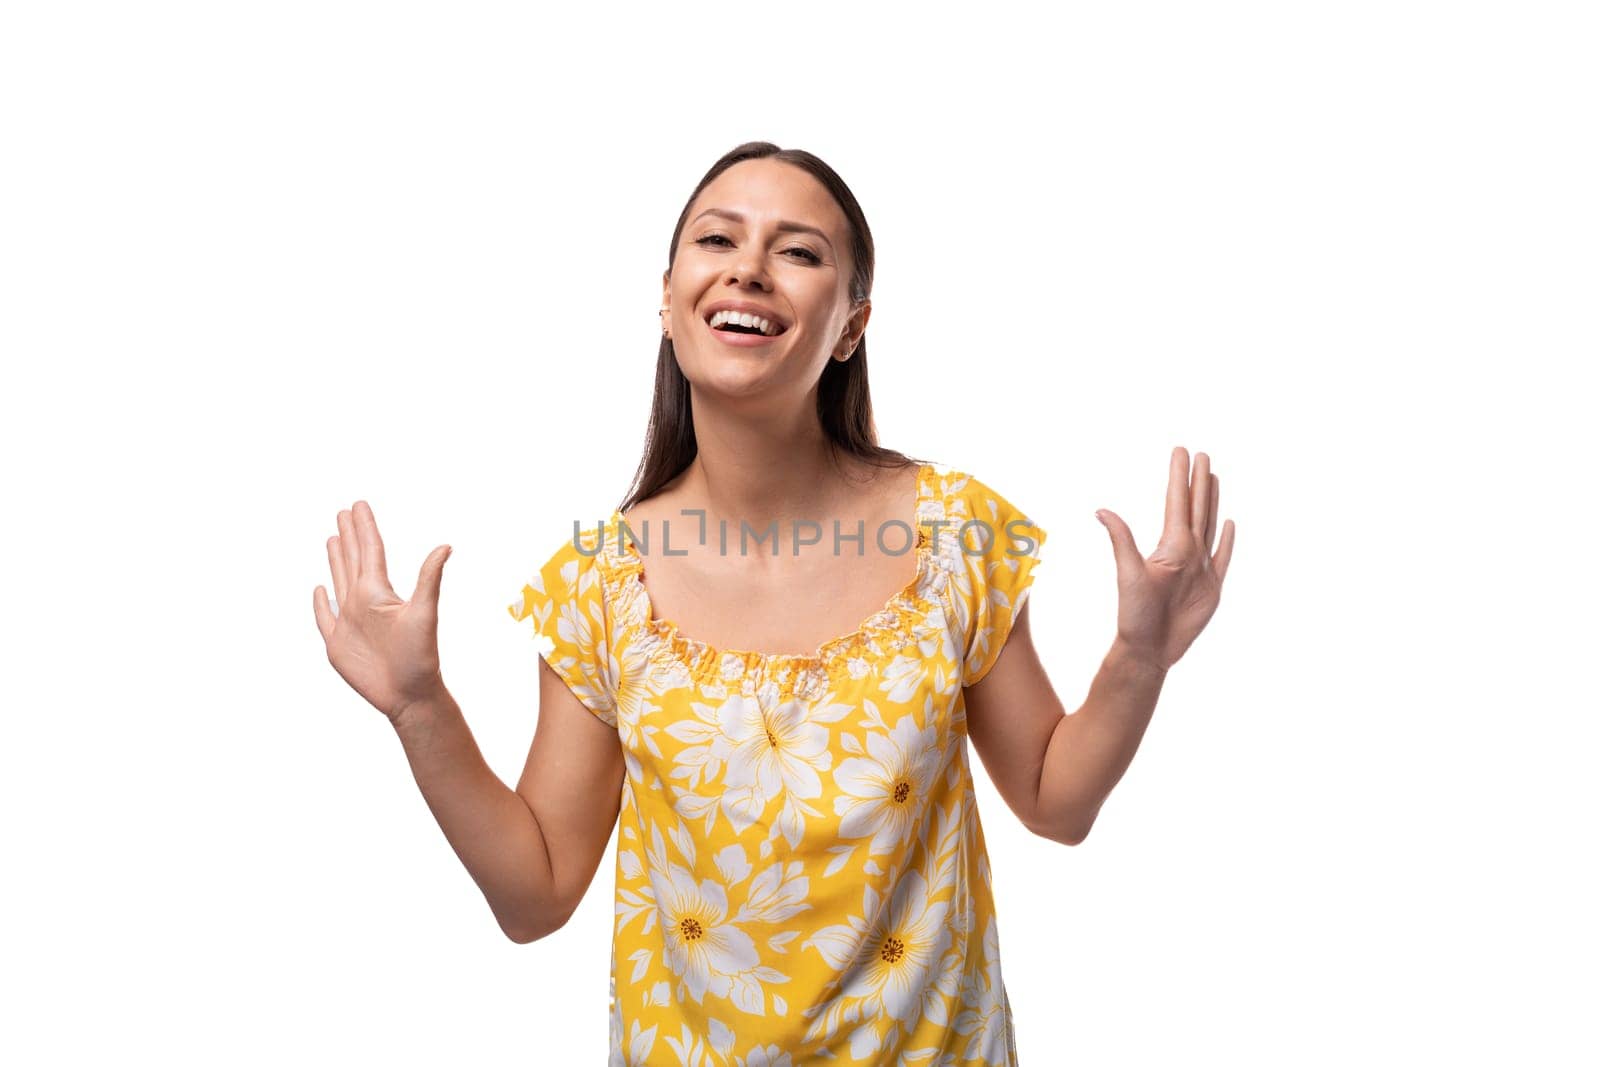 Caucasian young woman with straight black hair smiles welcomingly on a white background.